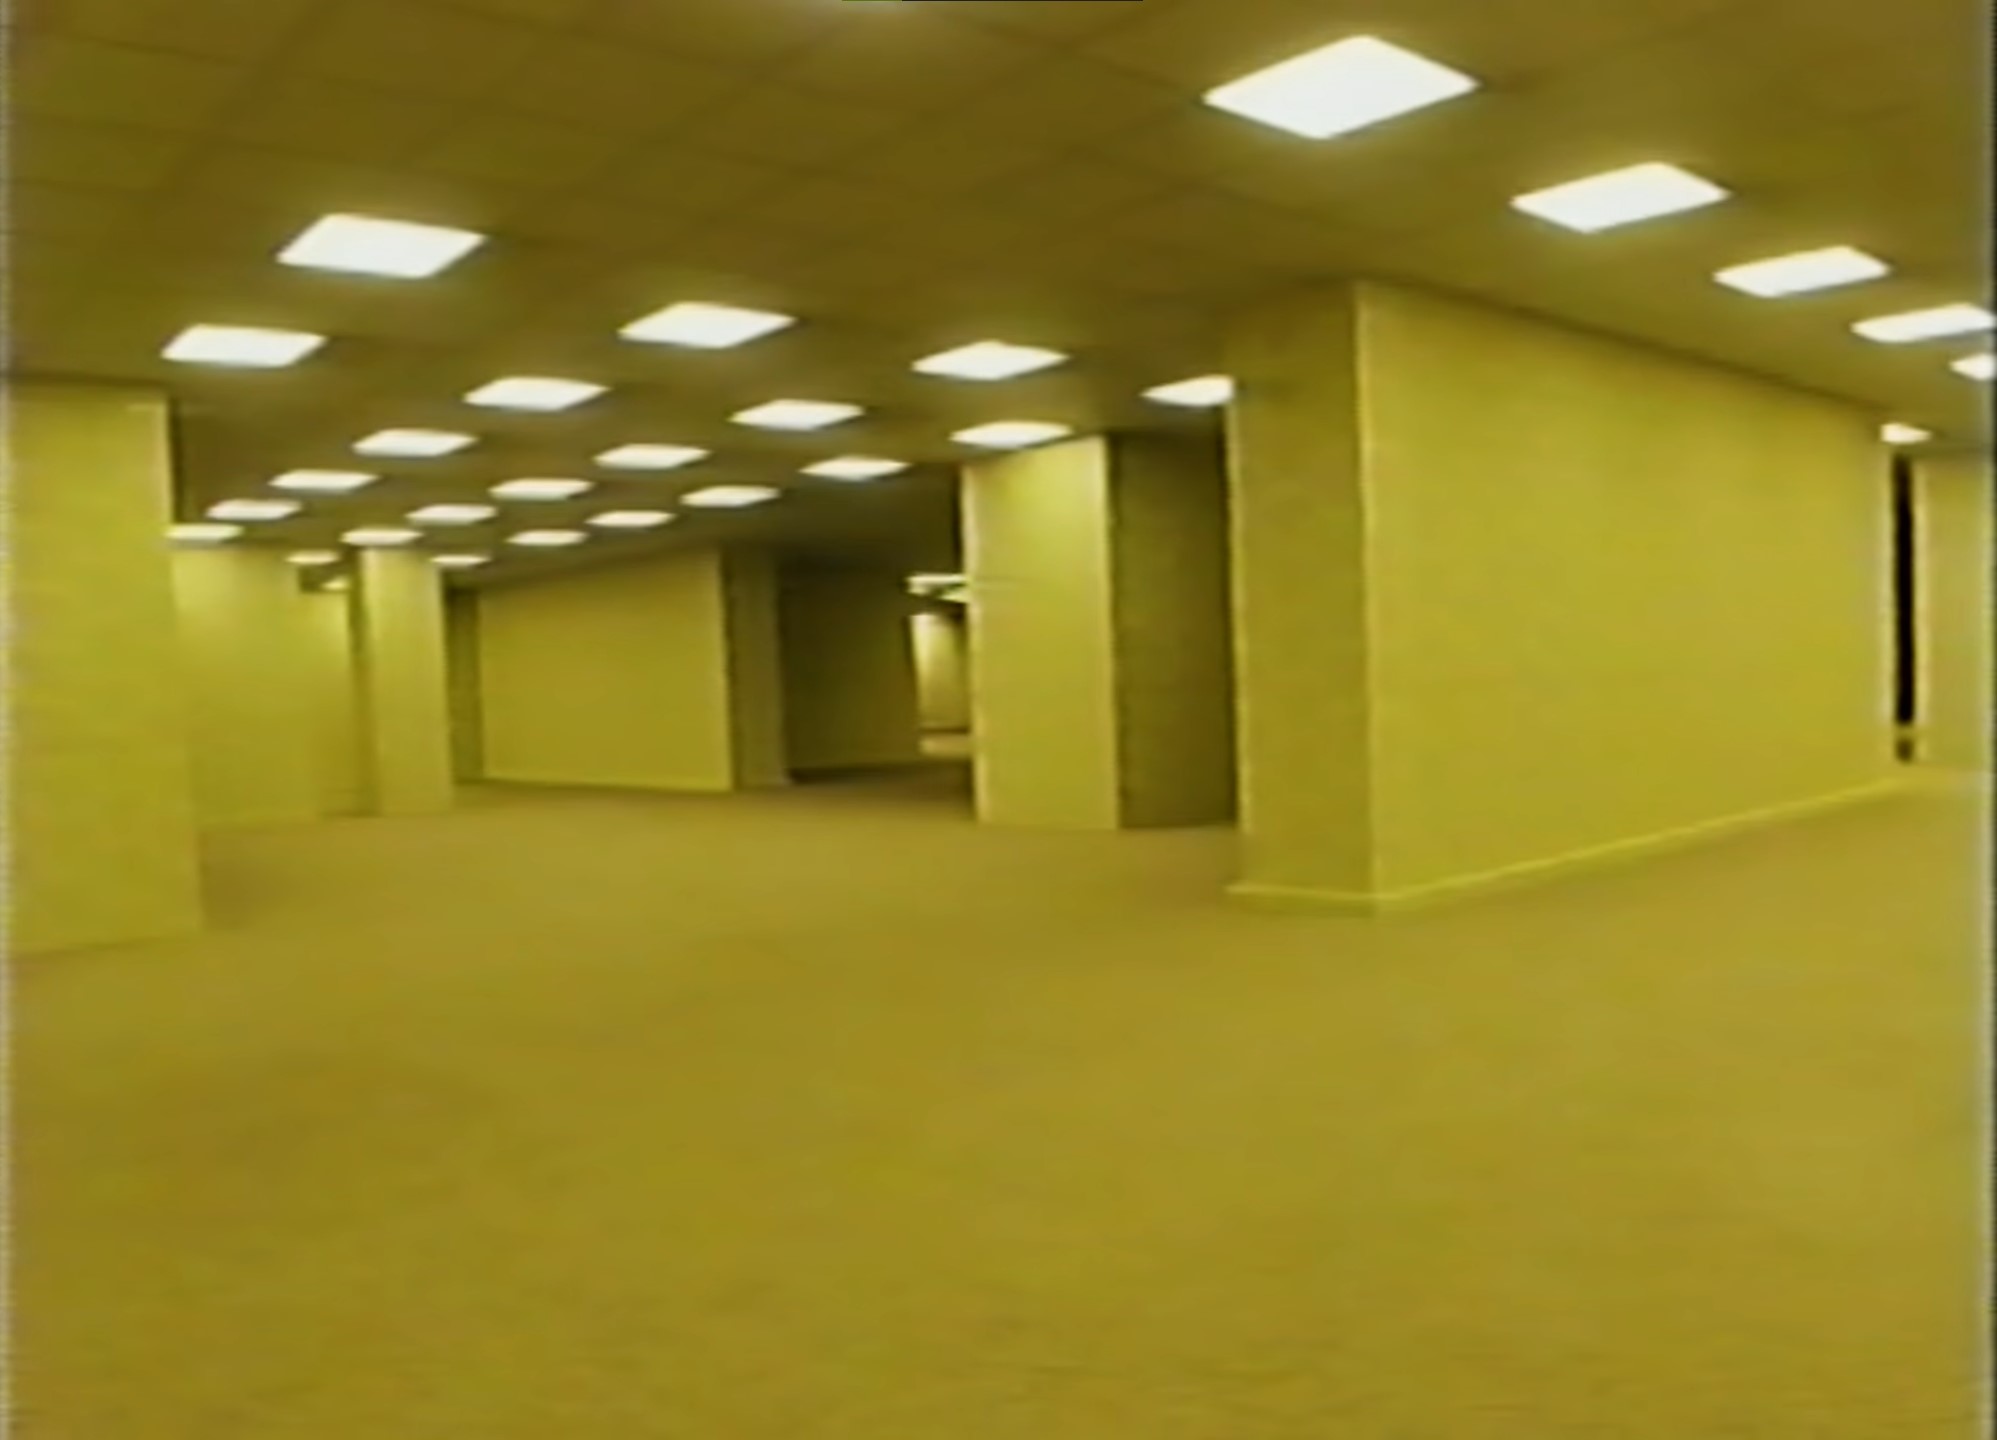 I accidently noclipped into a empty room, There is no exit and I need help.  : r/backrooms